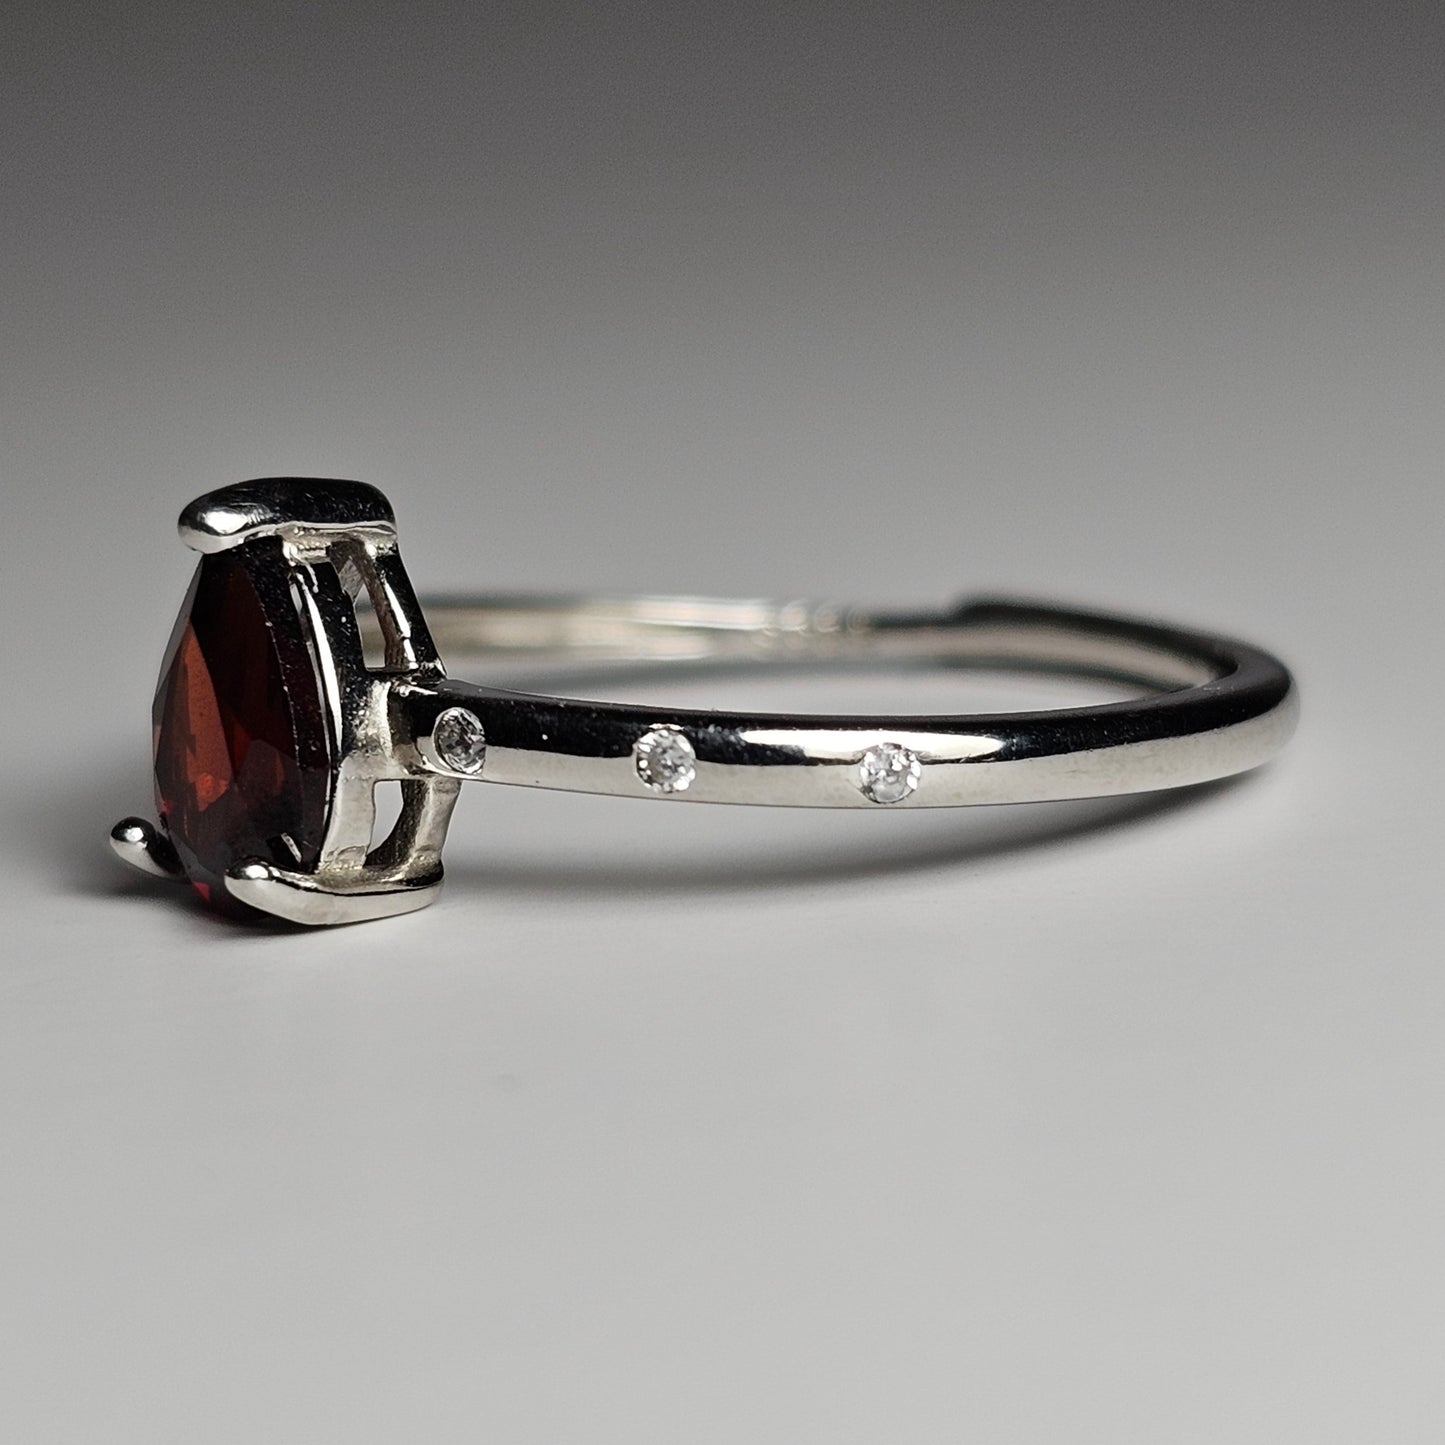 This adjustable fine ring is crafted from sterling silver and features a pear cut Garnet with zircon inlays along the shoulders of the ring band.